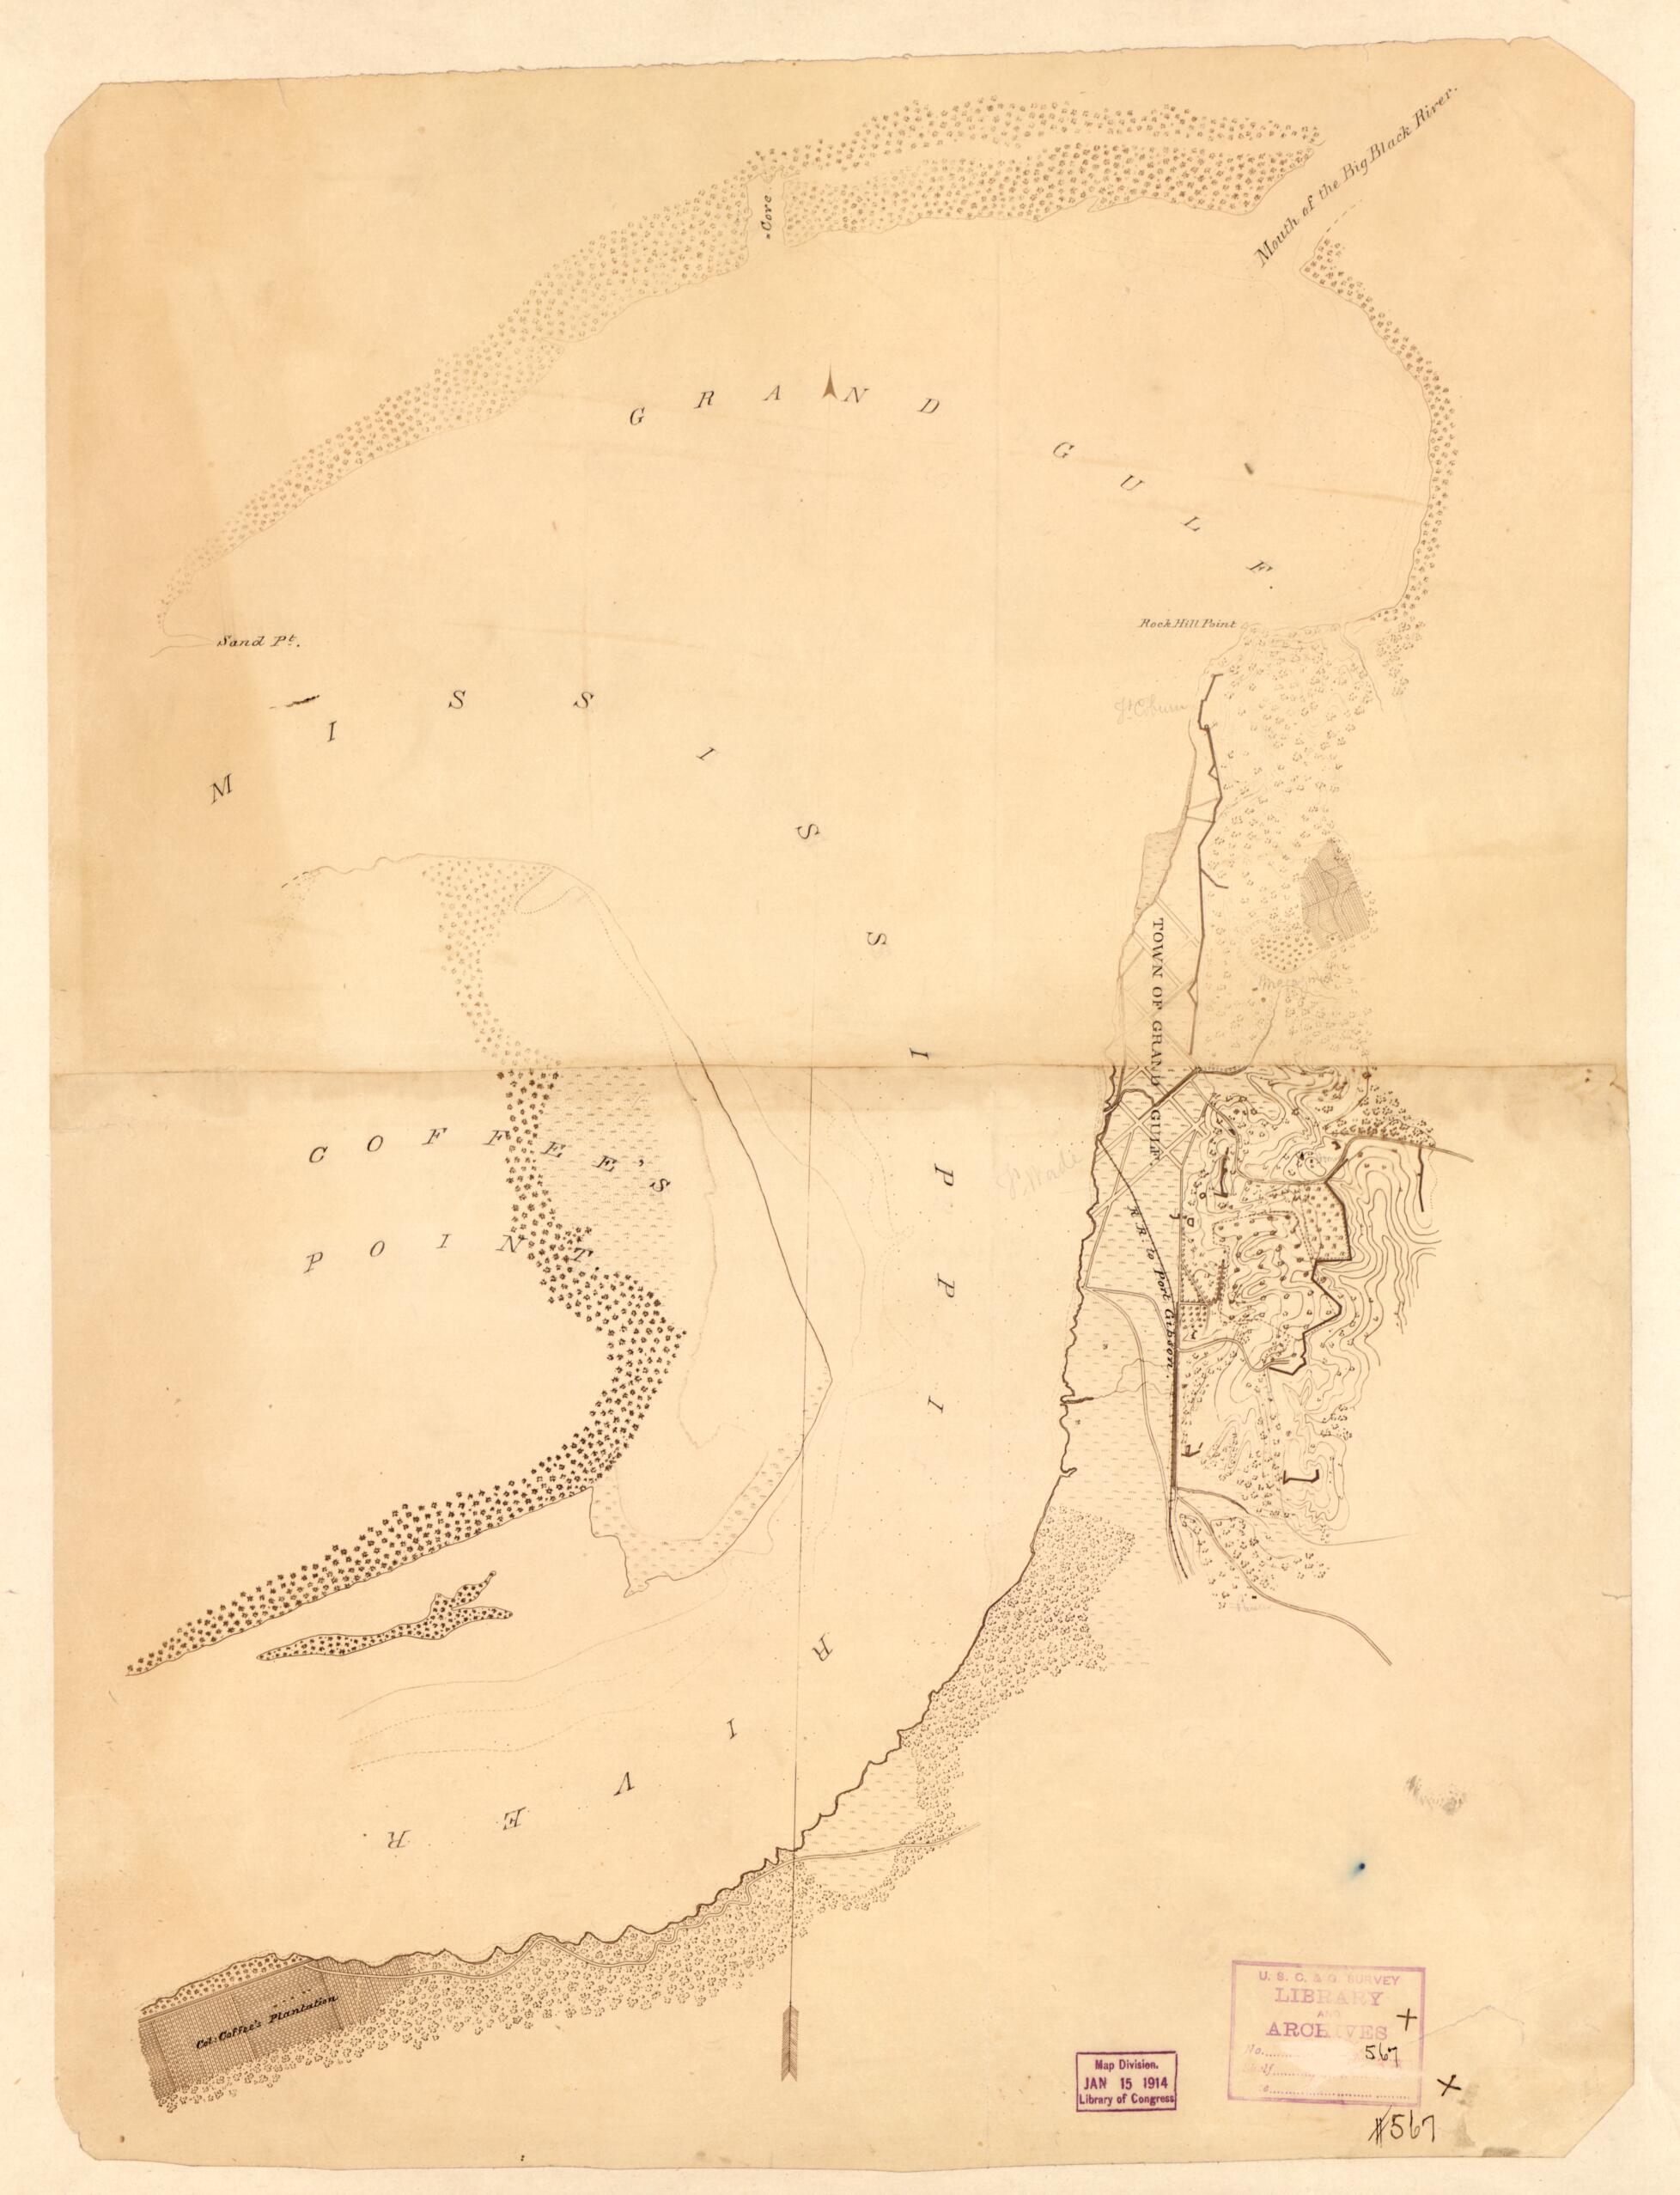 This old map of Approaches to Grand Gulf, Mississippi from 1864 was created by F. H. Gerdes in 1864